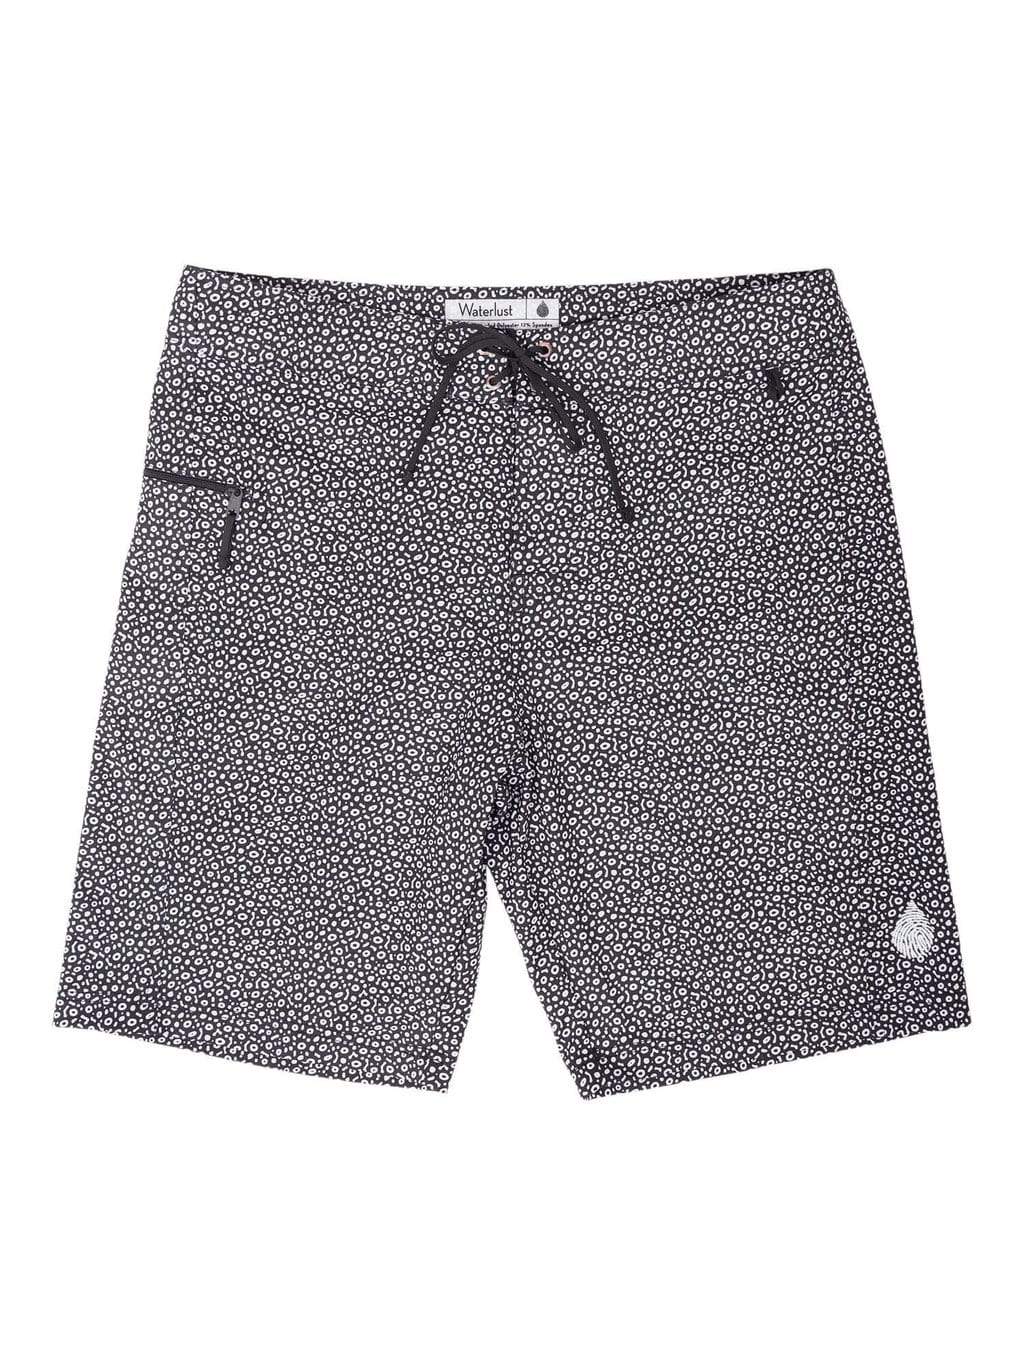 Waterlust Spotted Eagle Ray Boardshorts flat off body view